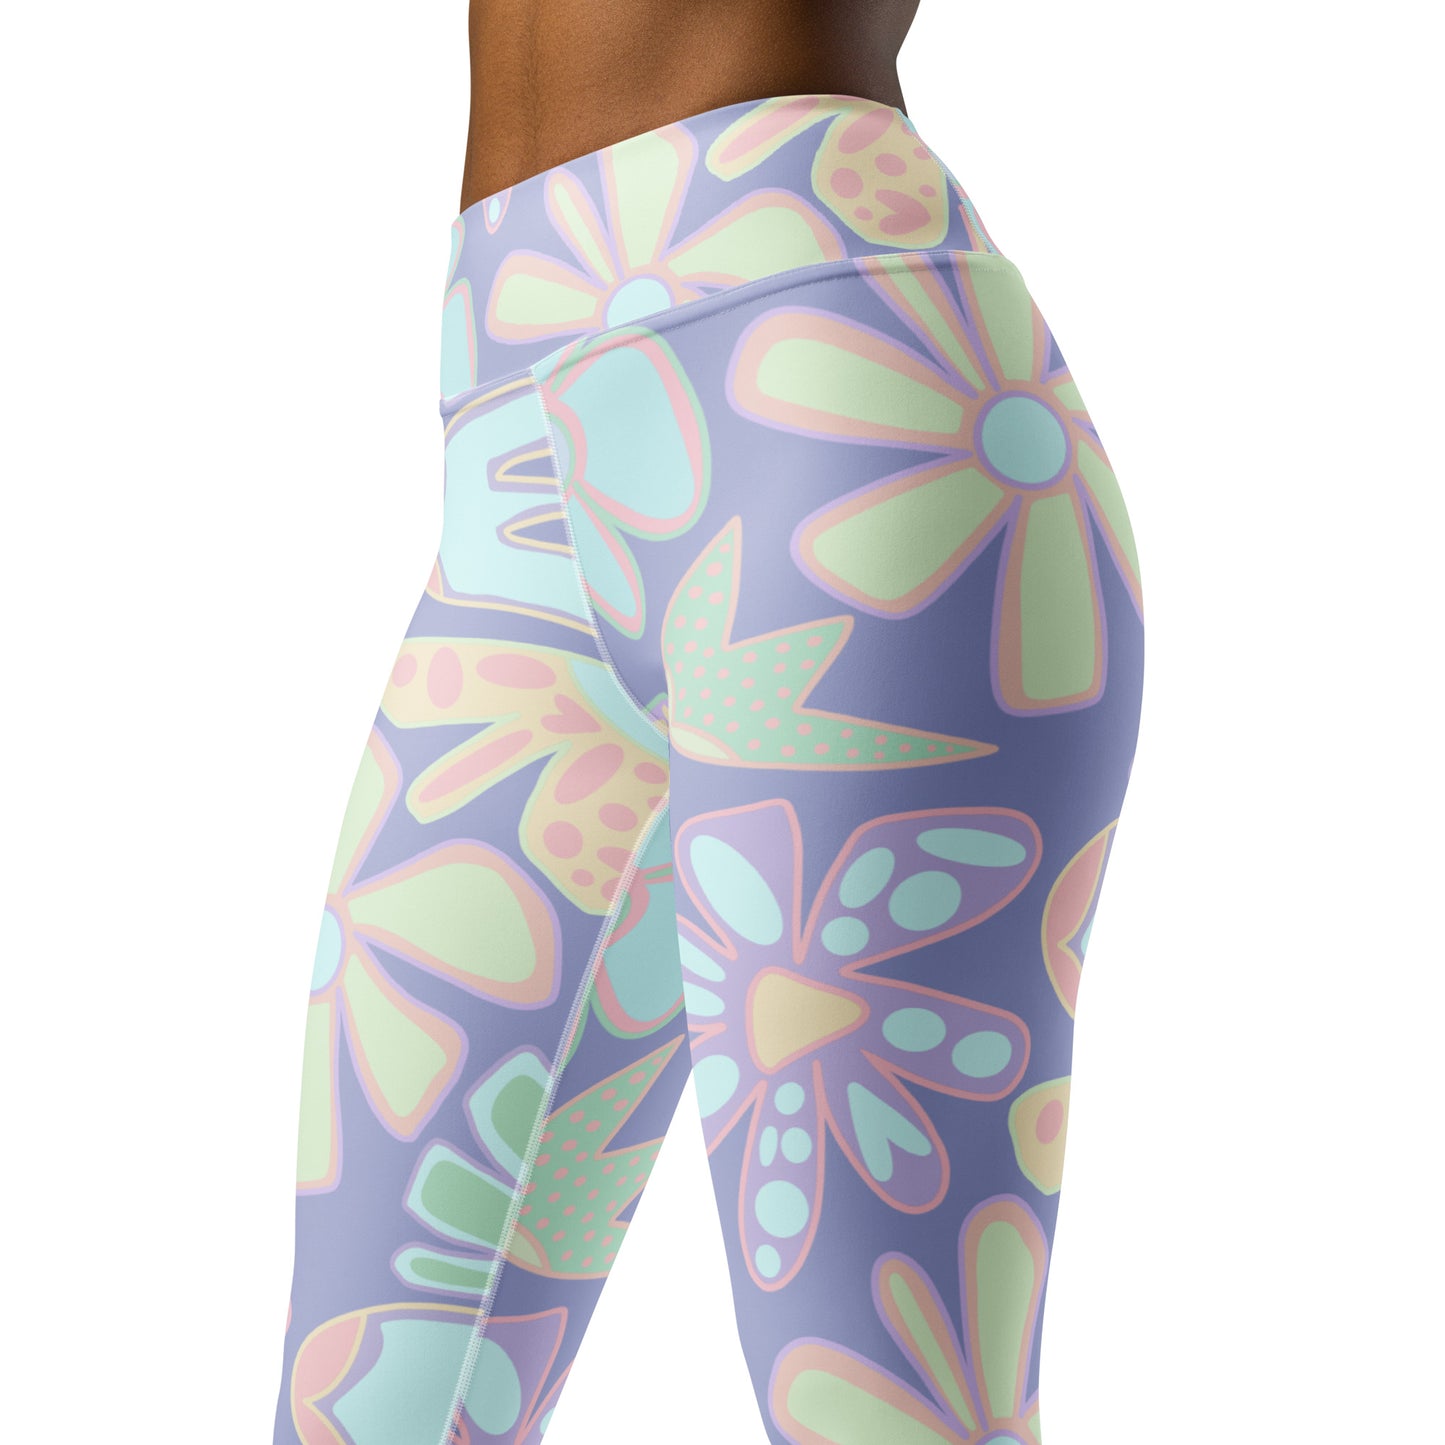 BC Easter Limited Edition Squat Proof Light Support. Yoga Leggings